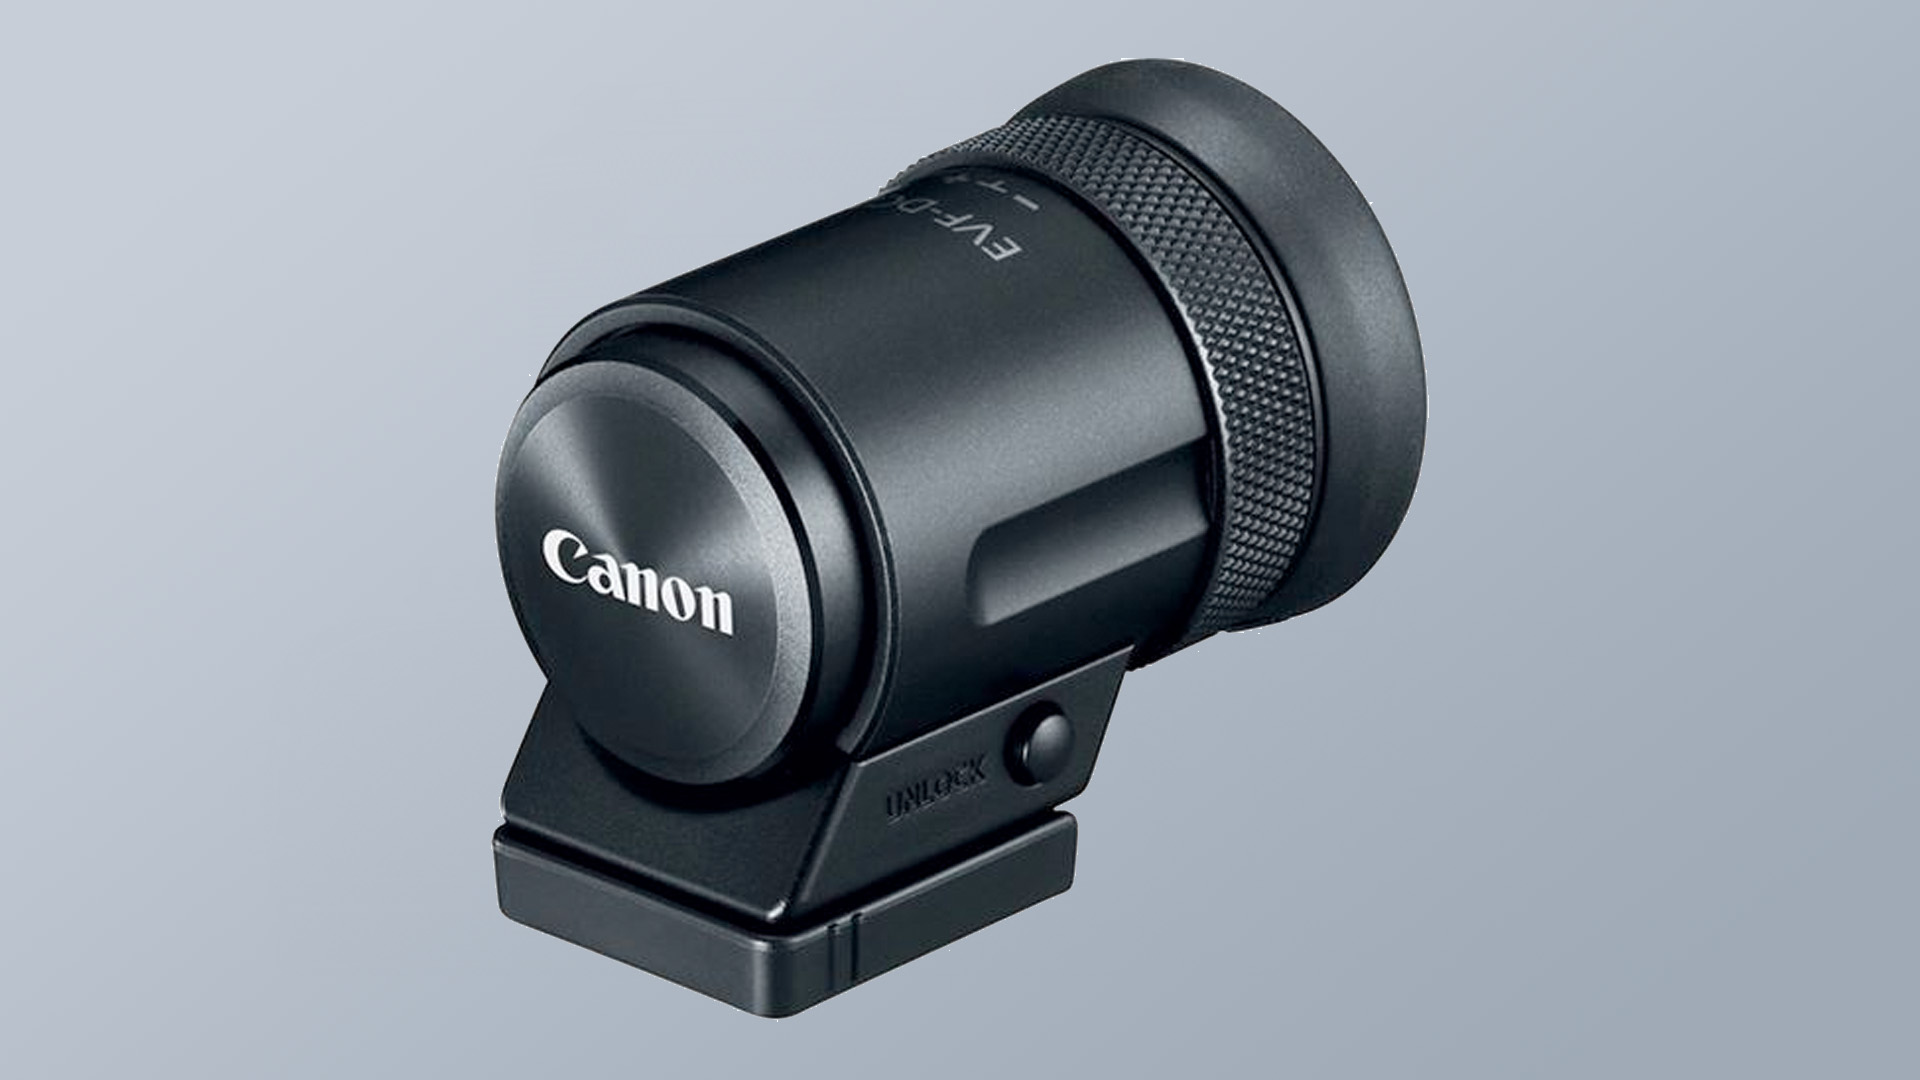 A mocked up image of the rumored Canon EOS R100 mirrorless camera